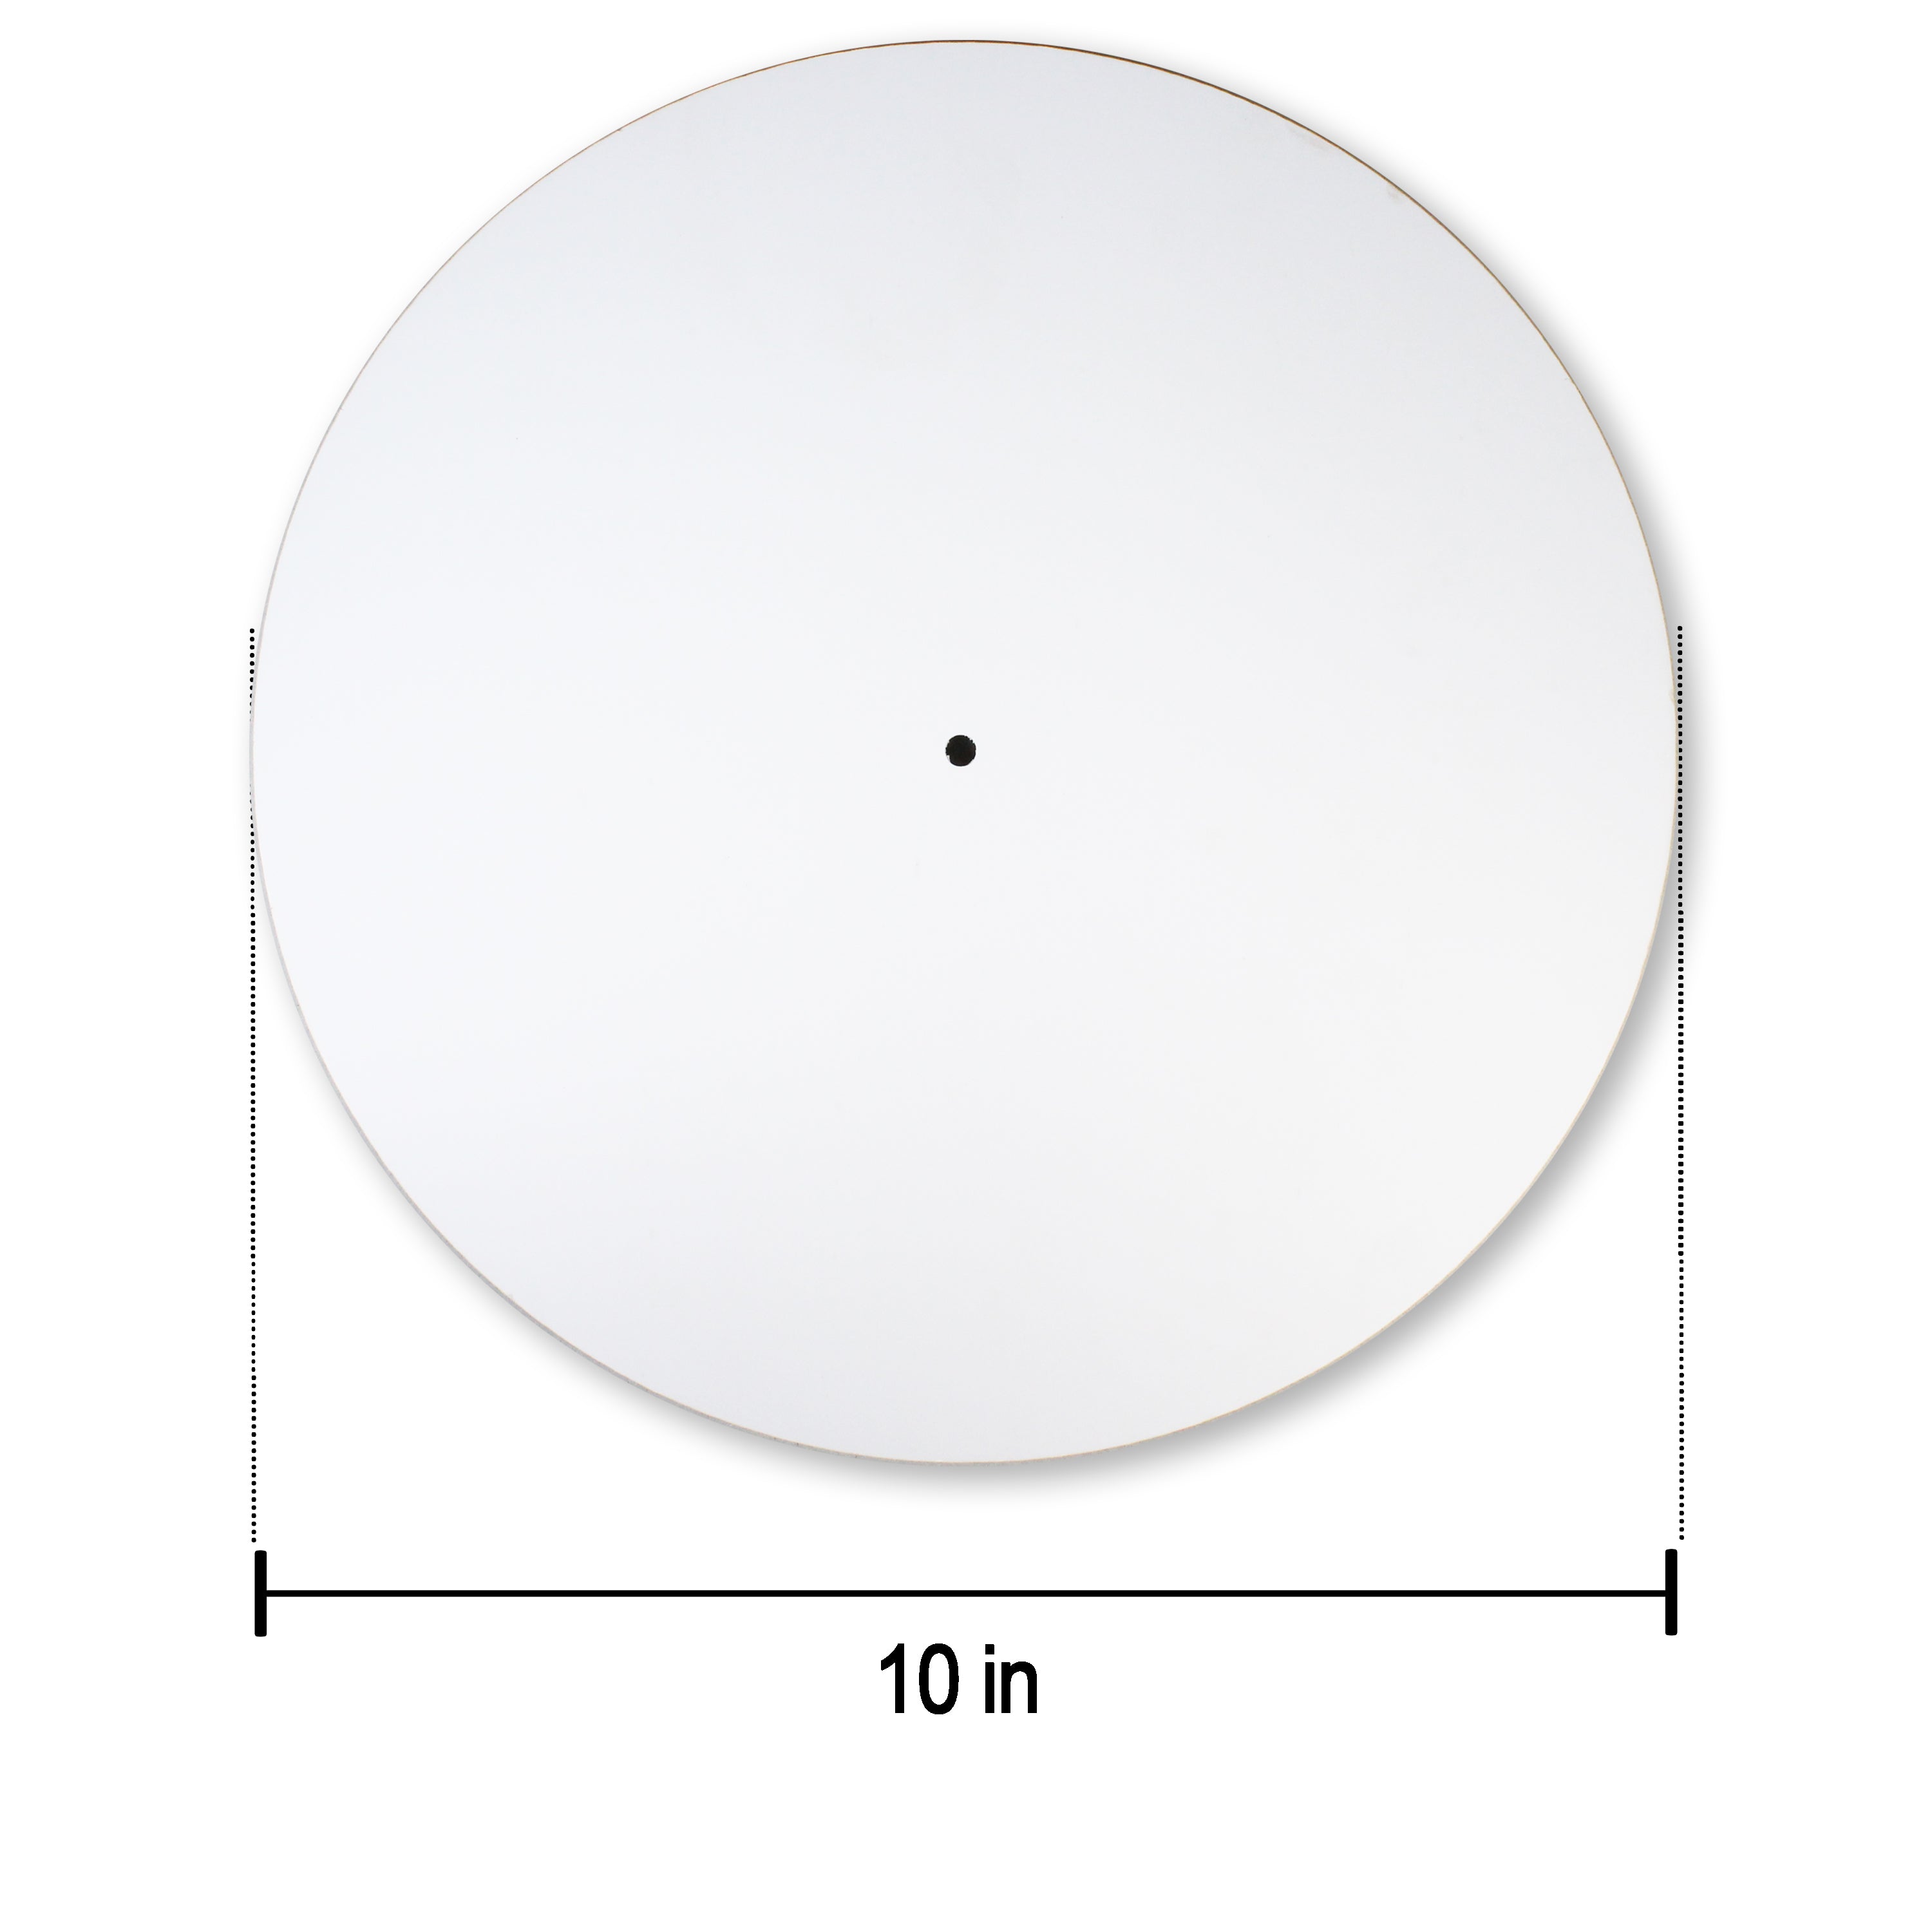 Acrylic Clock Face White 10Inch Dia 3.7Mm Thick 1Pc Lb